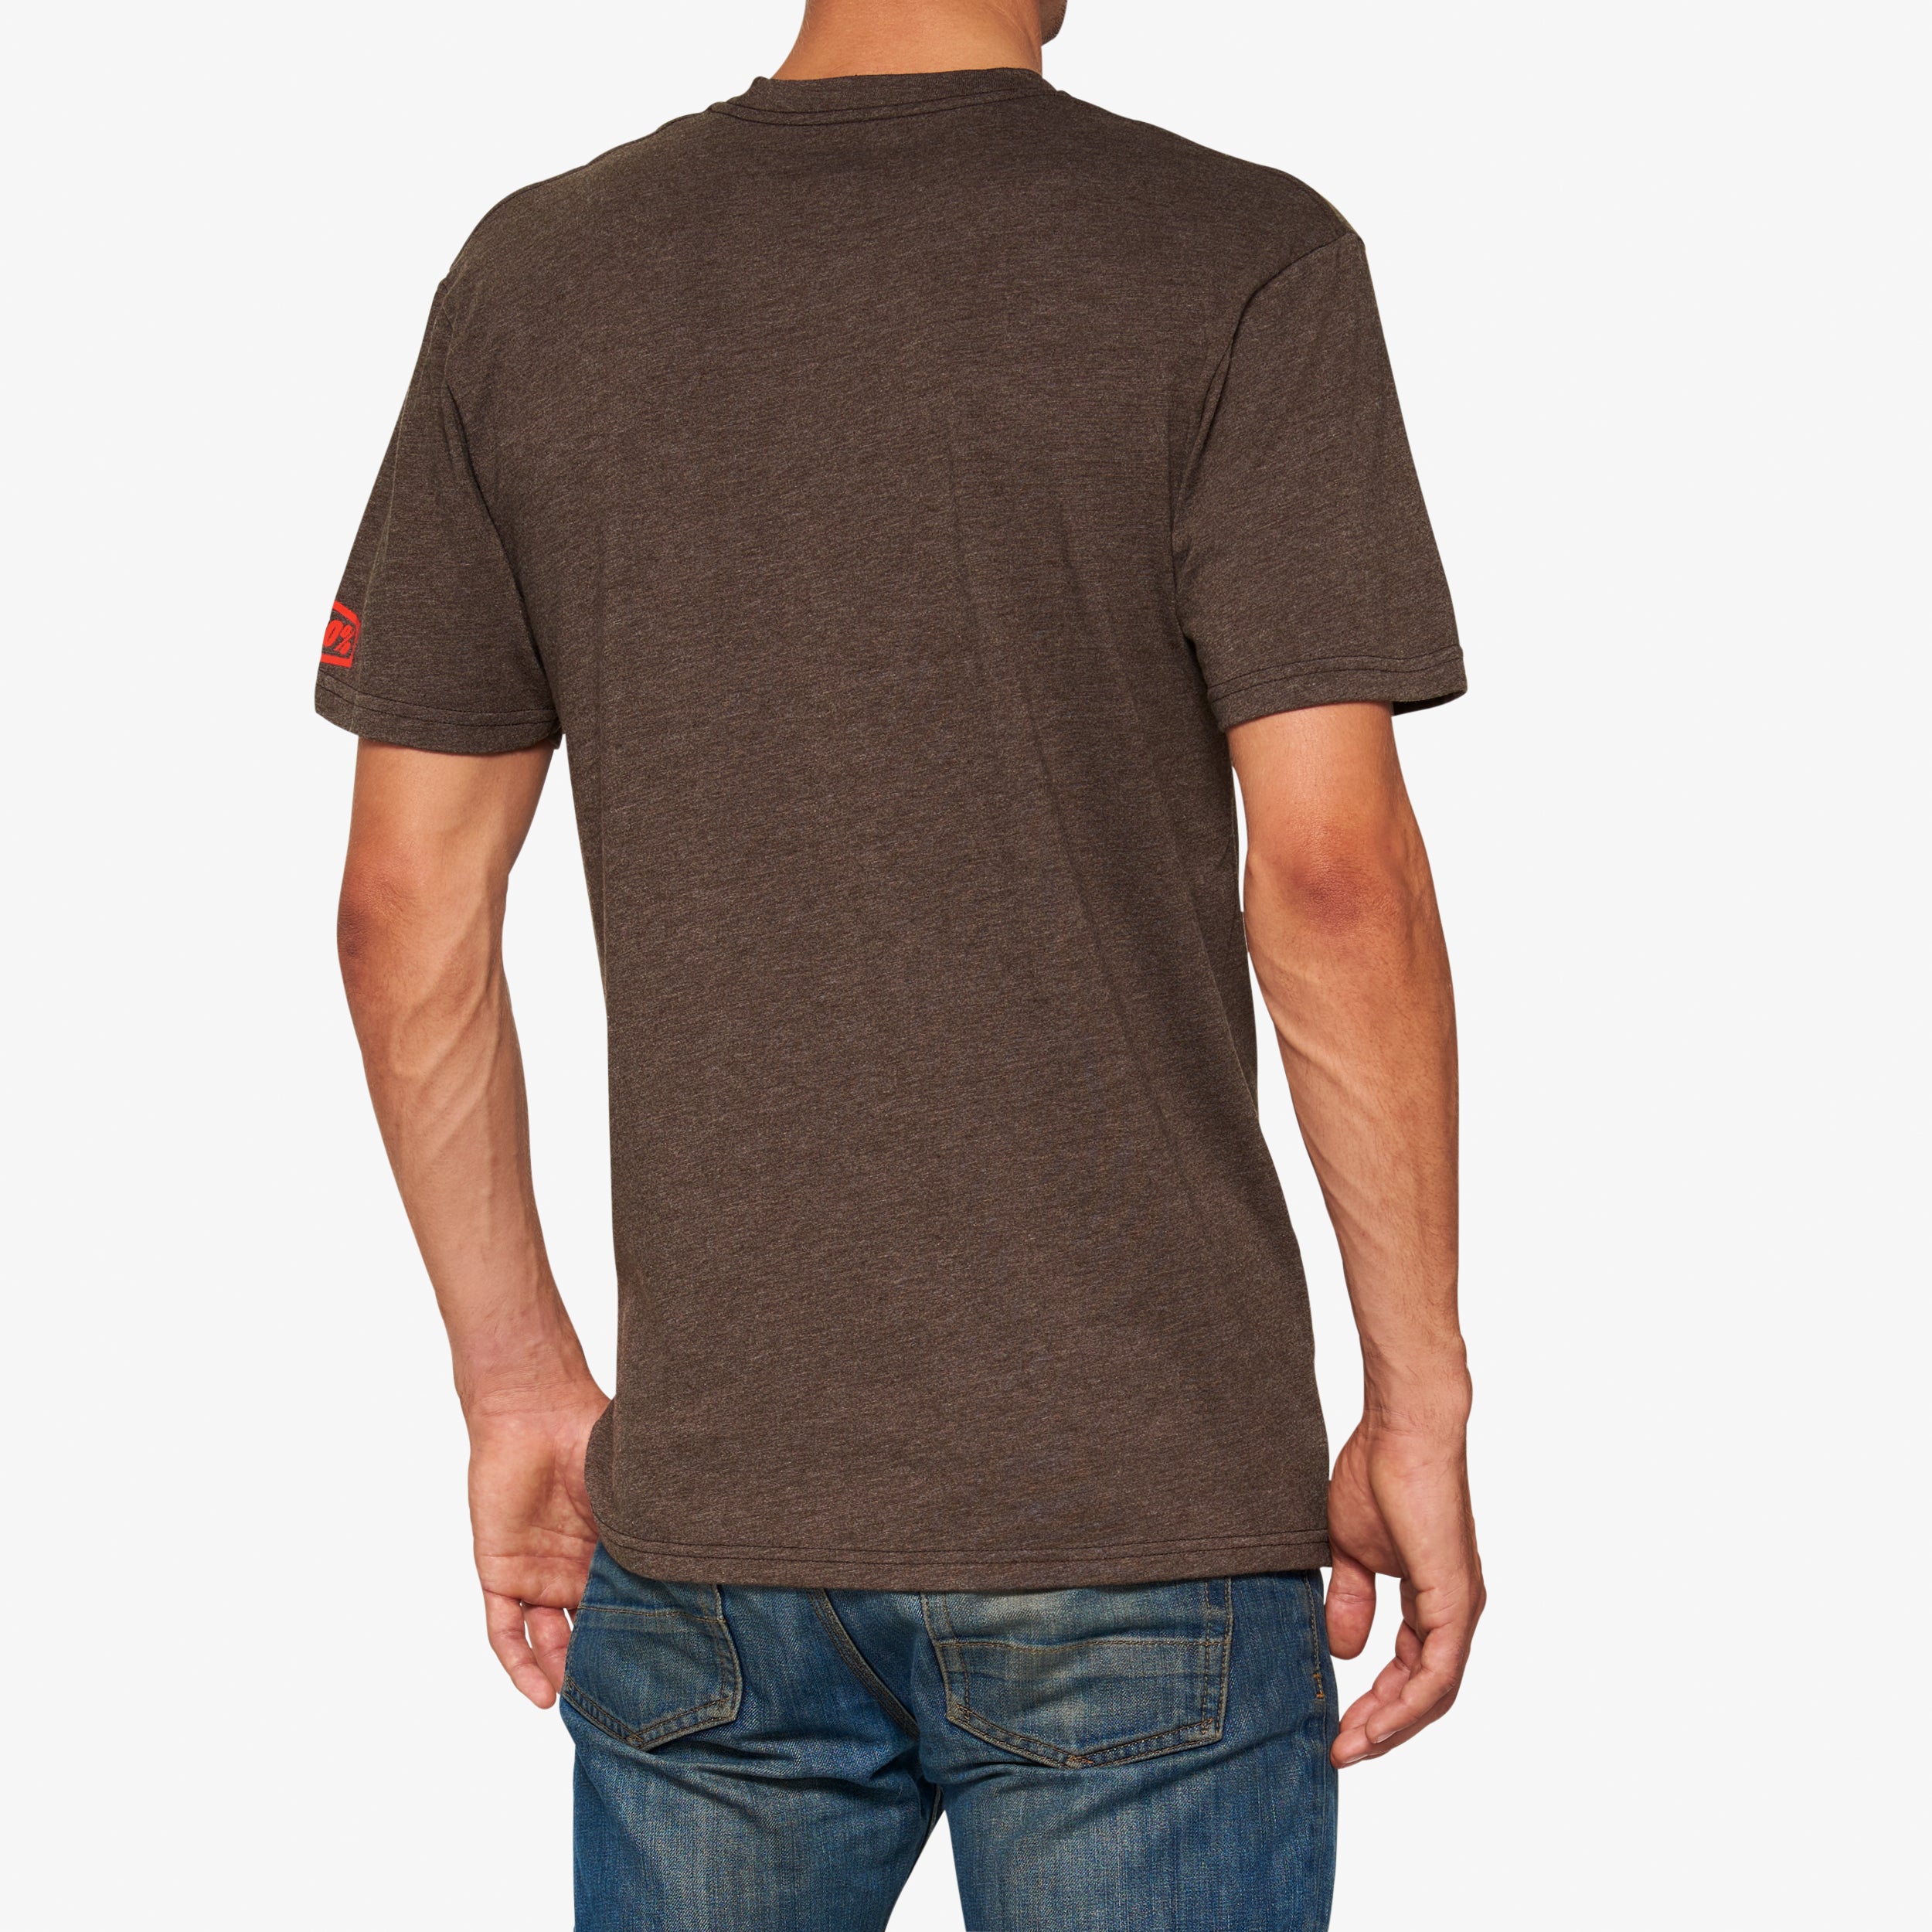 ASTRA Short Sleeve Tee Brown Heather - Secondary